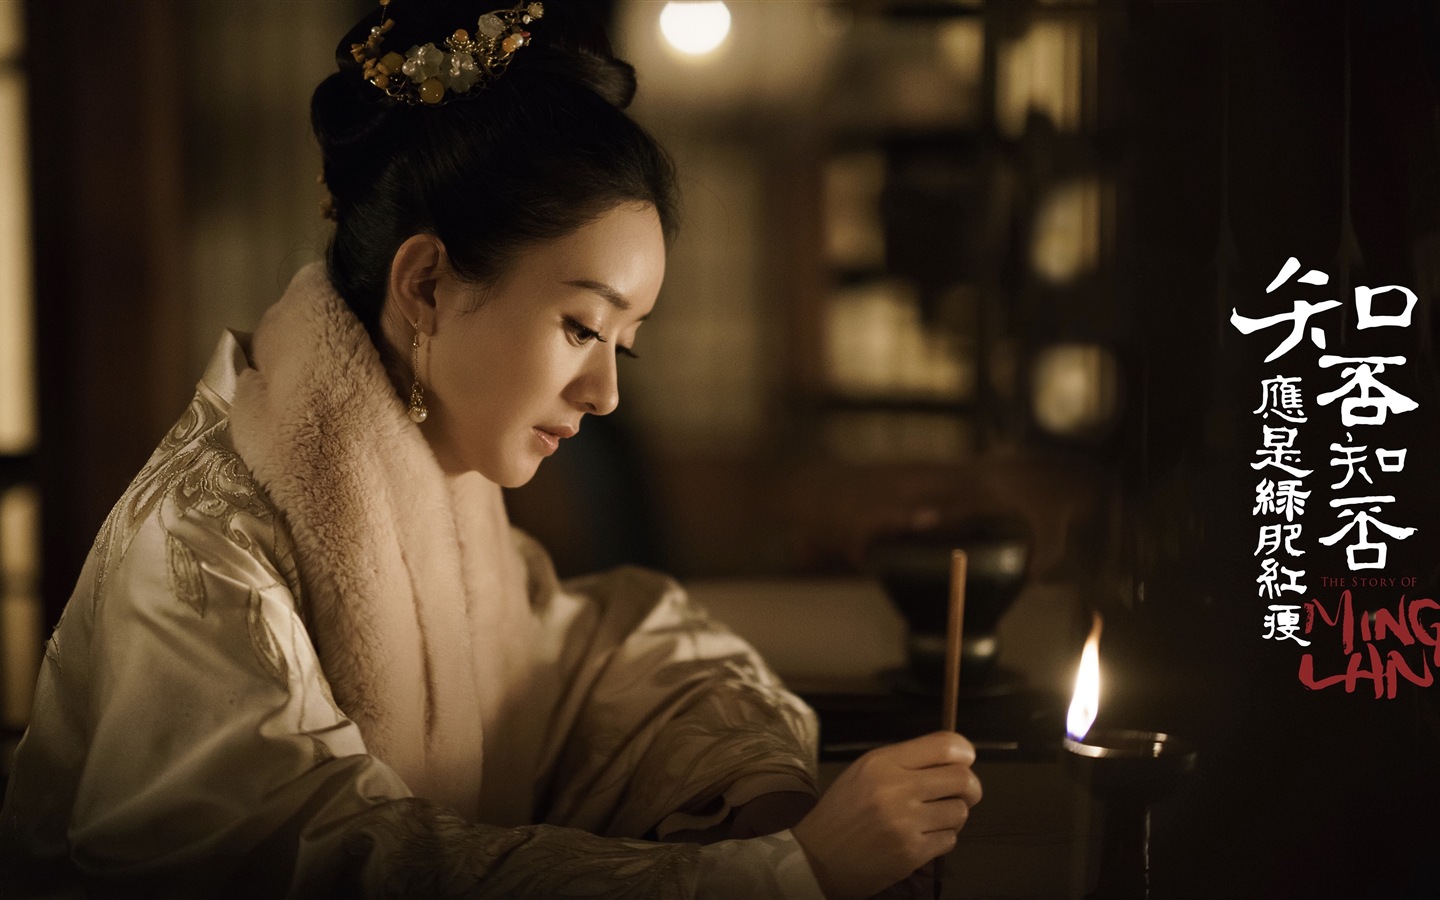 The Story Of MingLan, TV series HD wallpapers #26 - 1440x900